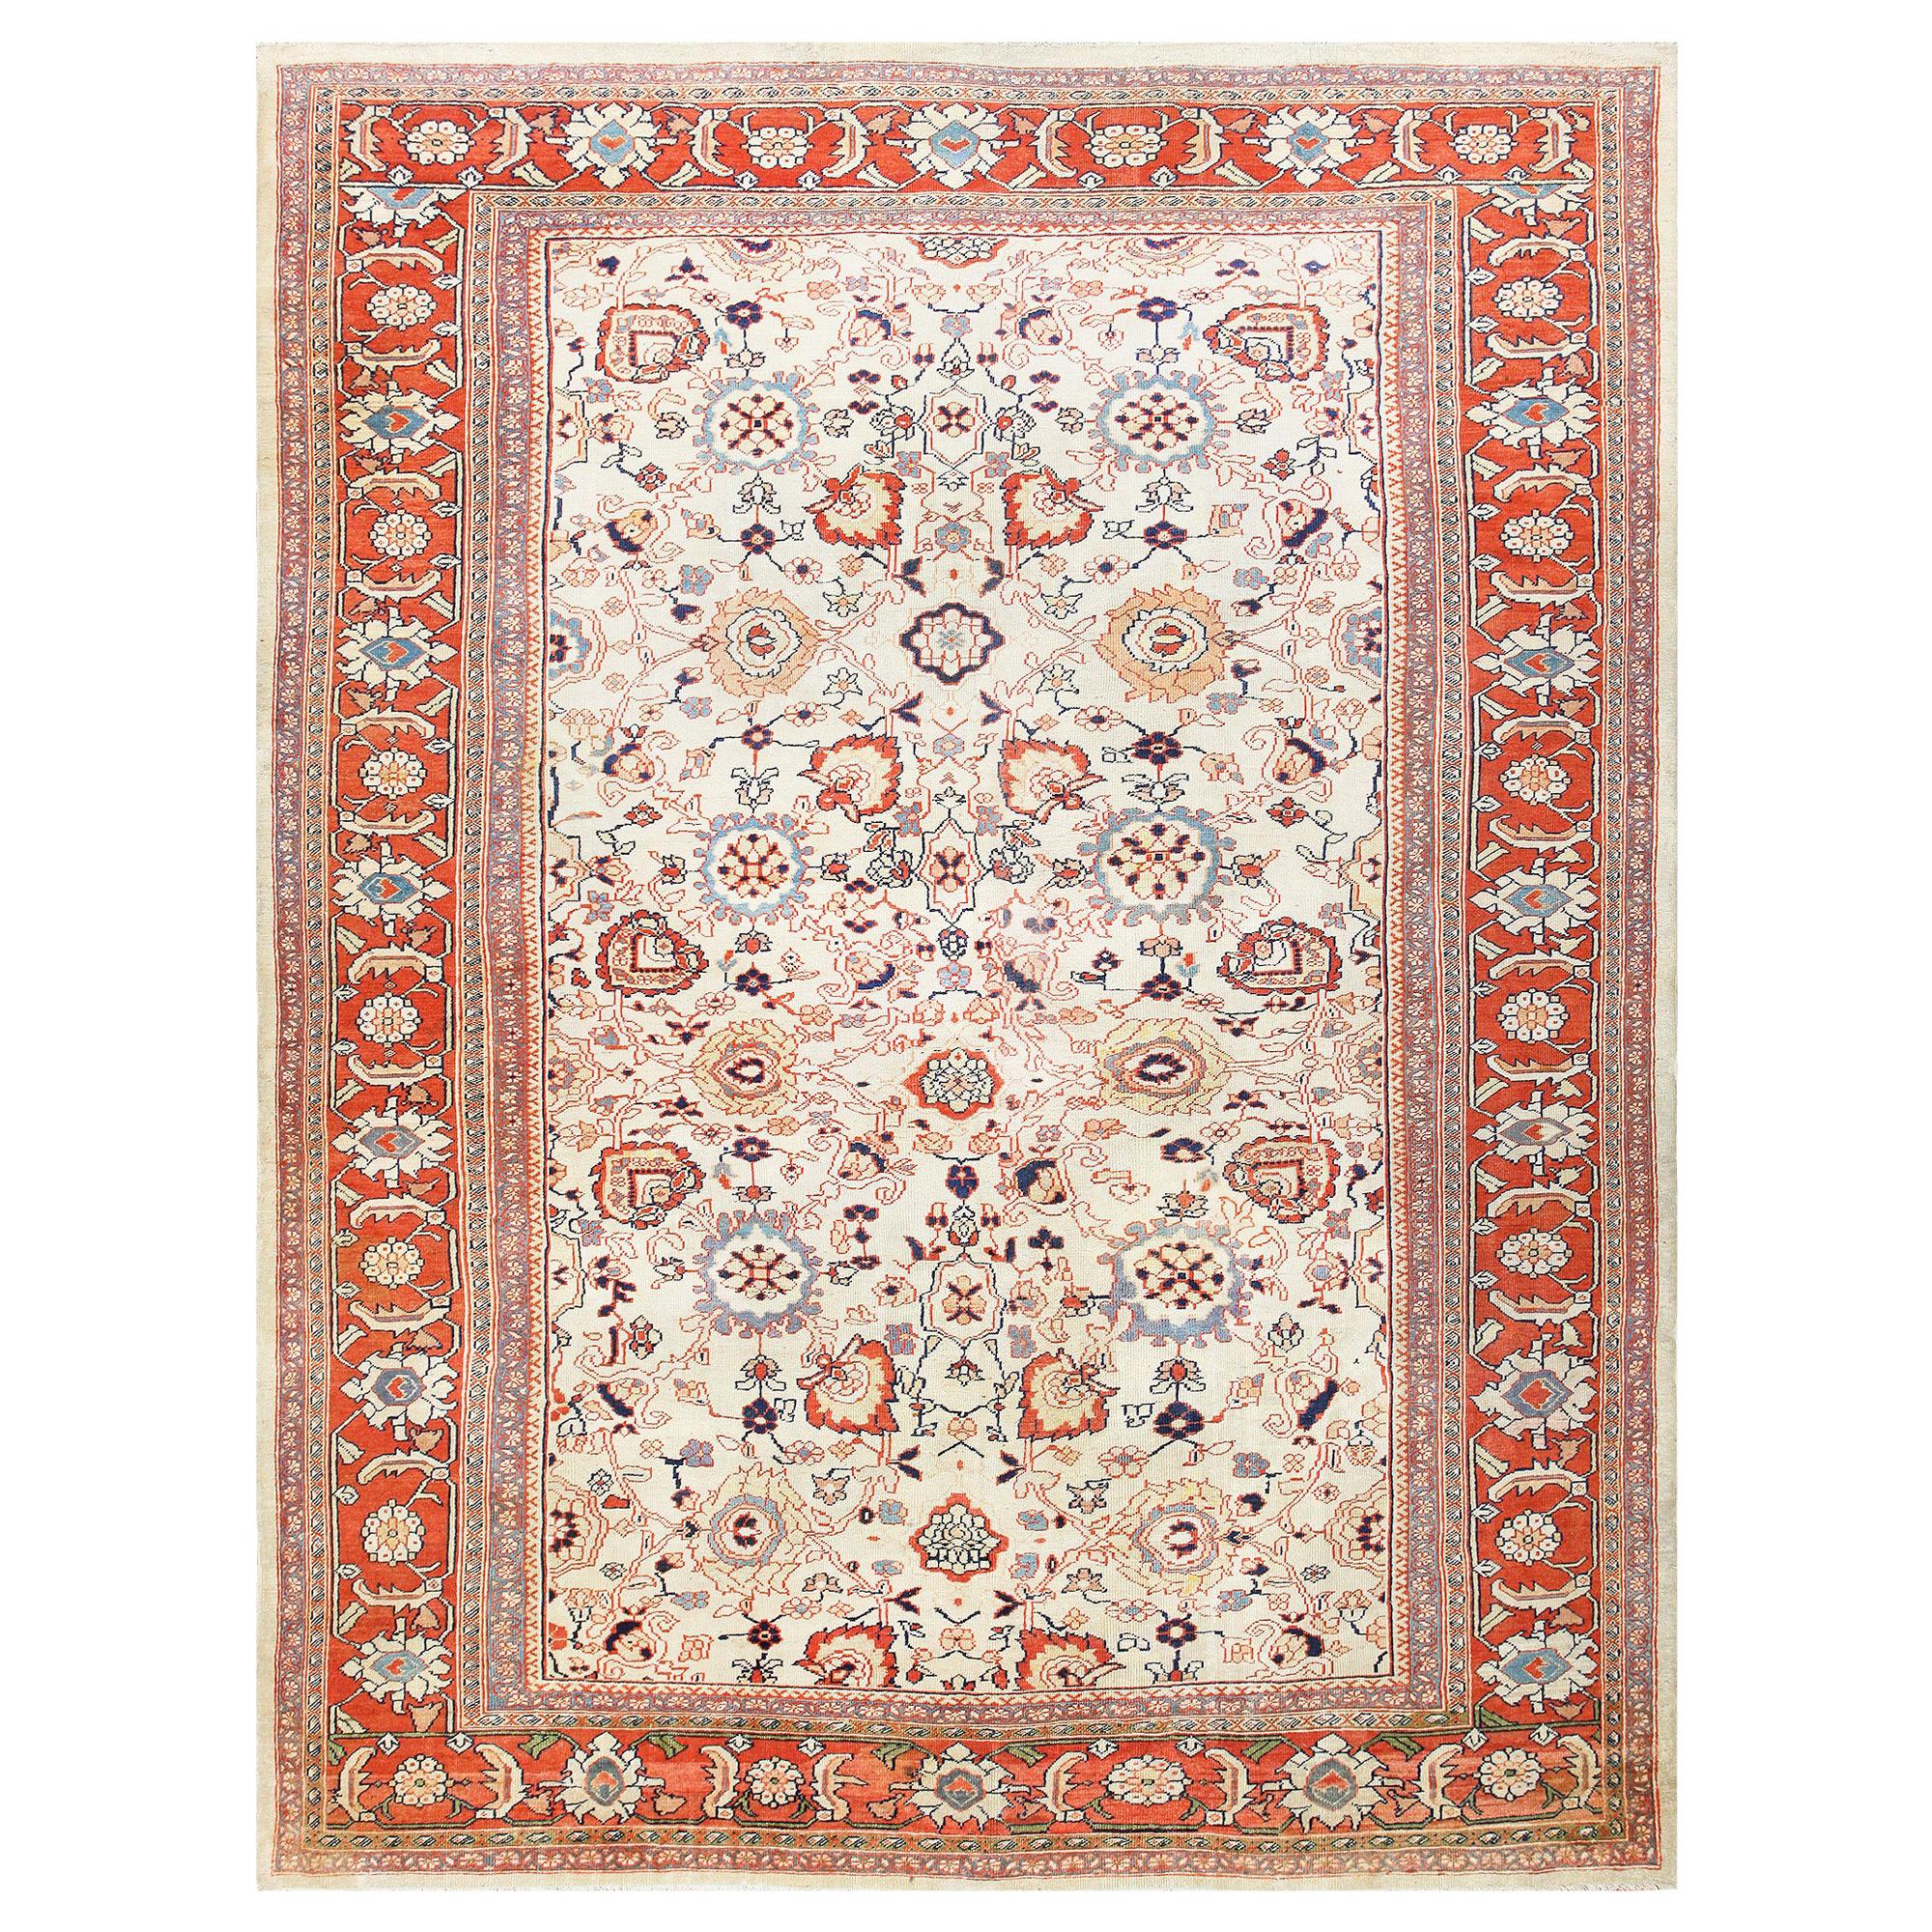 Tapis persan ancien de Sultanabad Taille : 11' x 14' 4"